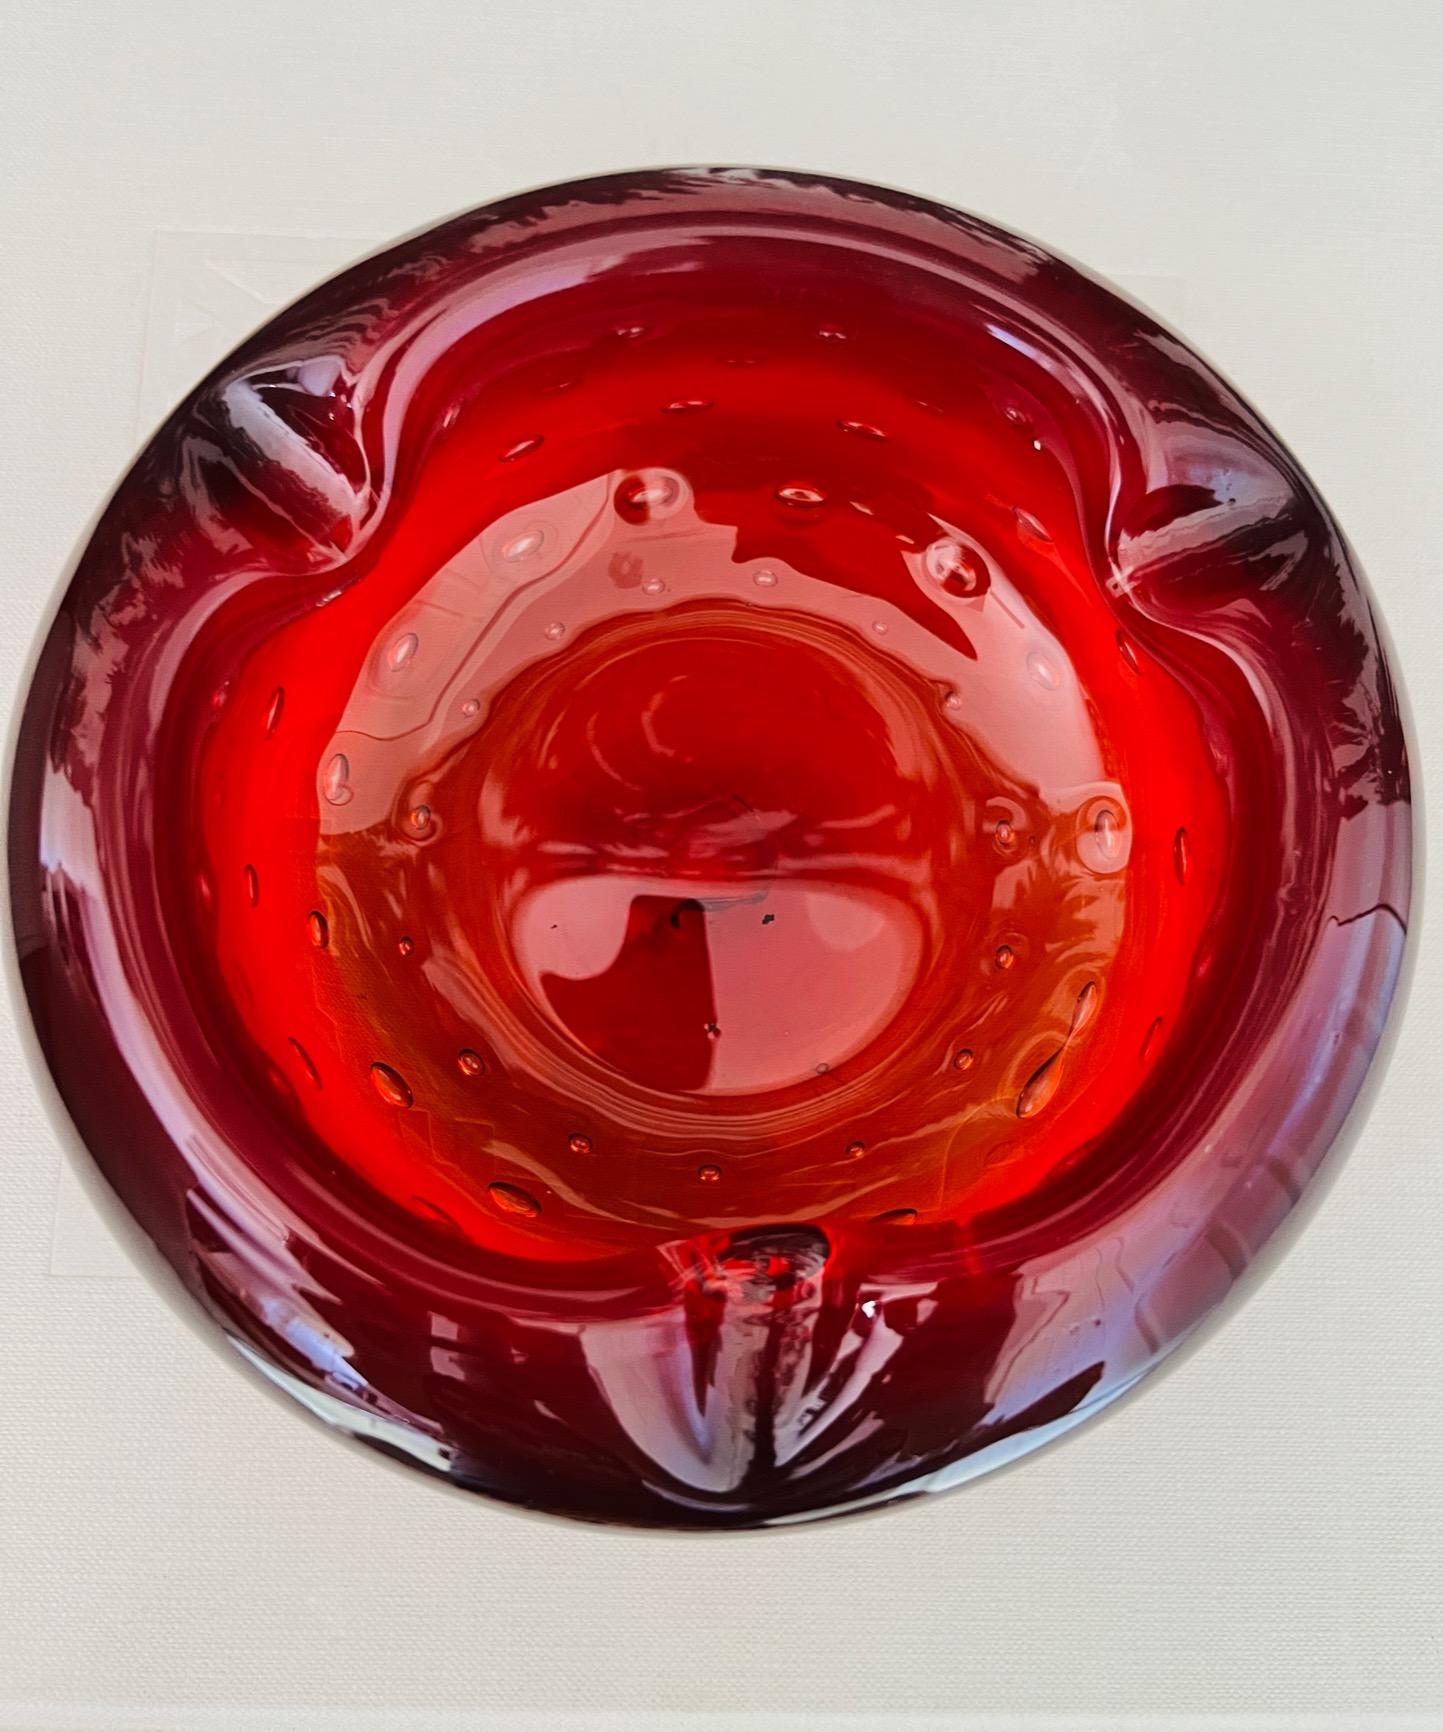 Blown Glass Red Murano Ashtray with Controlled Bubble Design by Seguso, c. 1950's